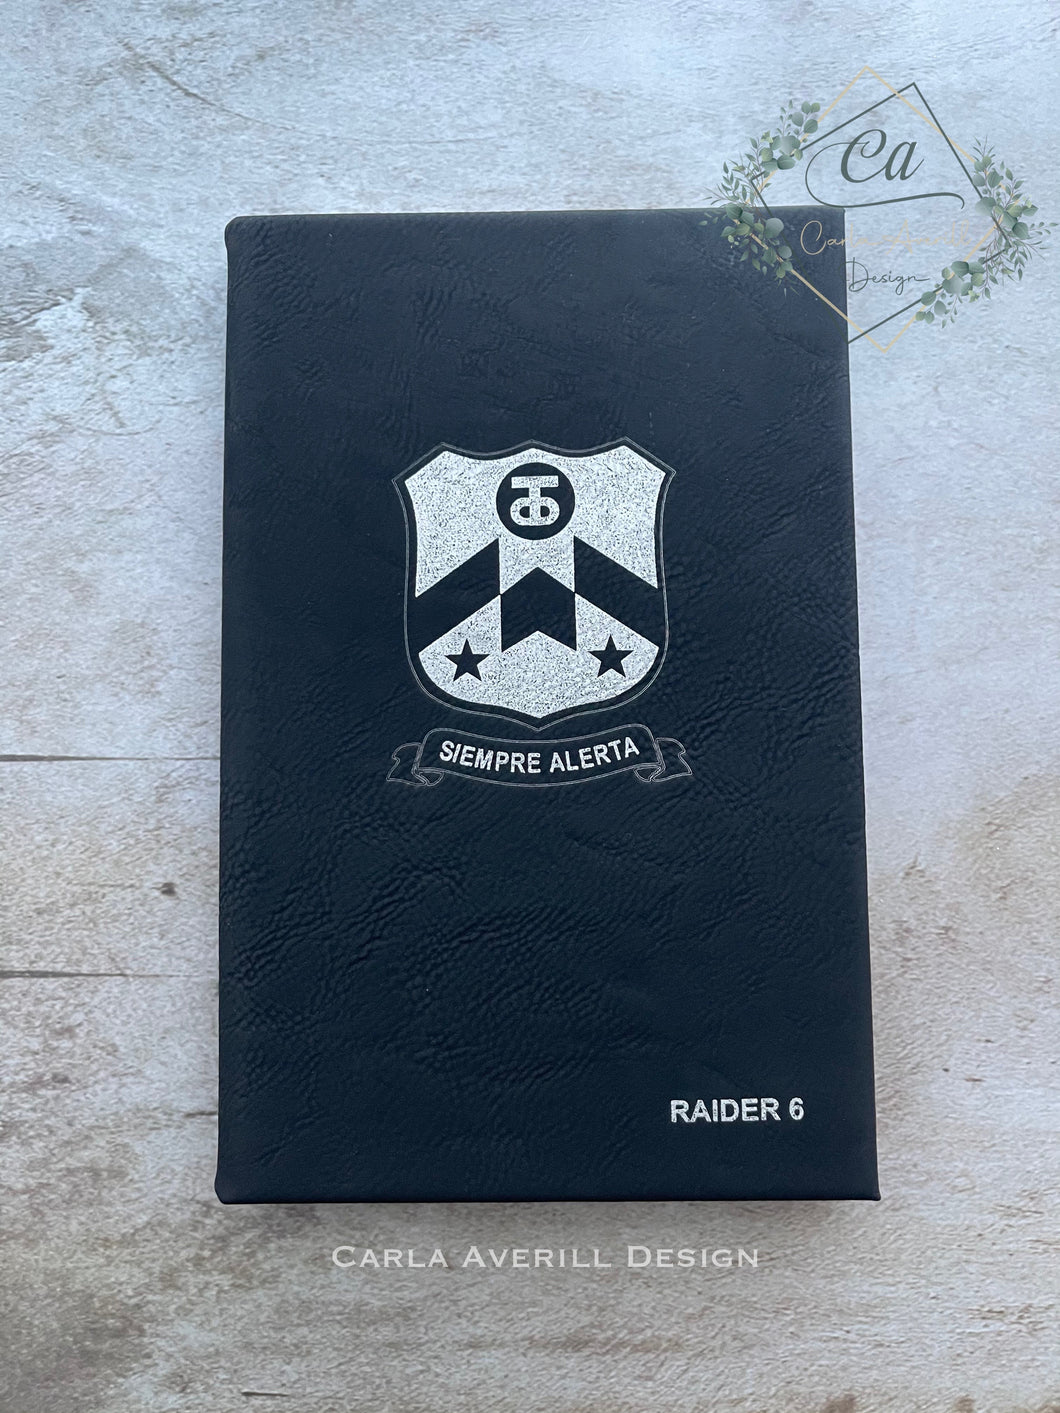 Engraved Leatherette Vegan Journal with Unit Crest and Call Sign